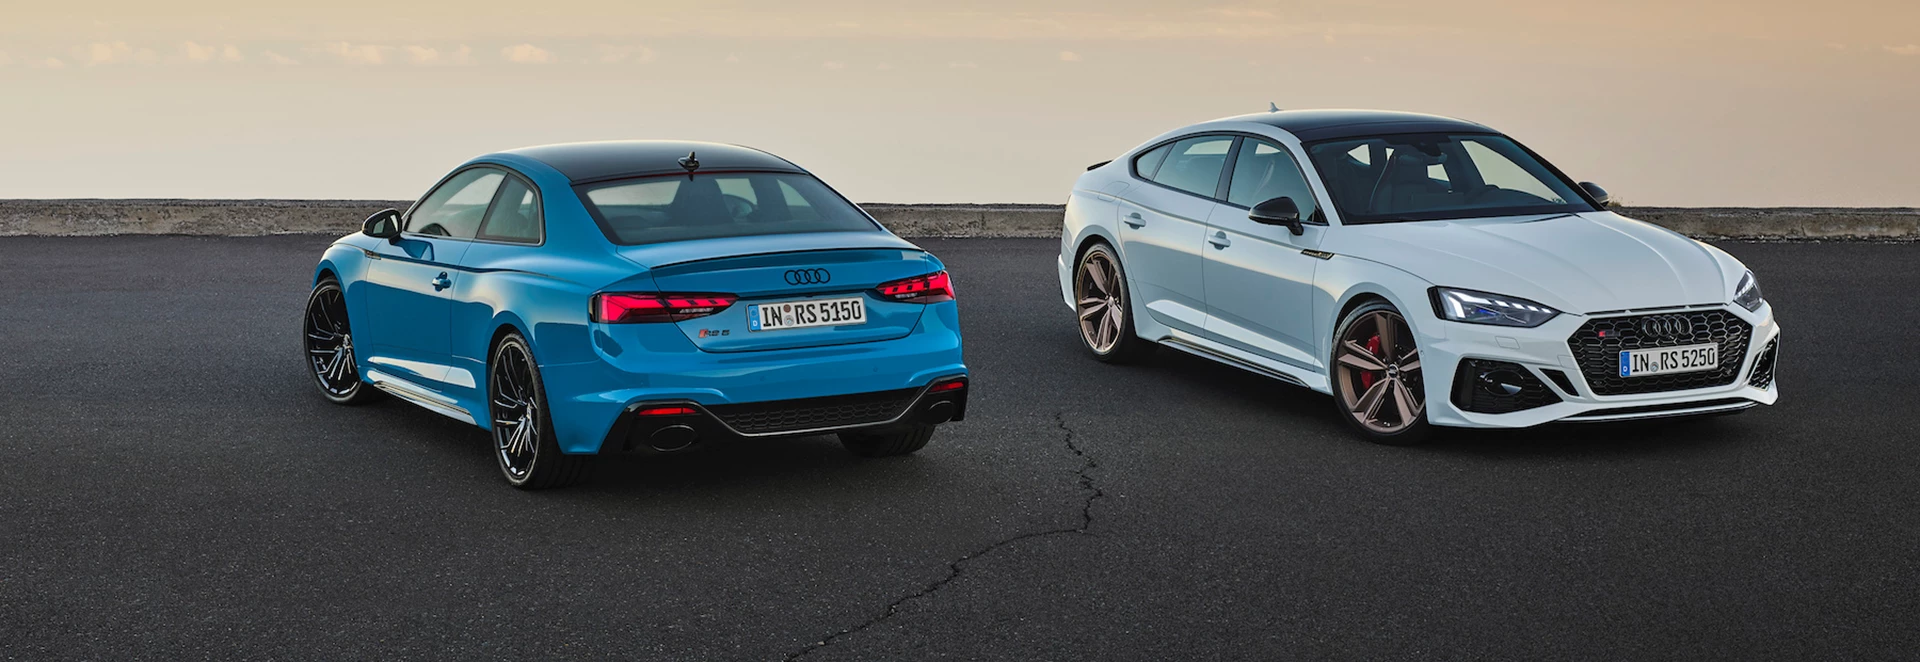 Audi RS5 and RS5 Sportback revealed